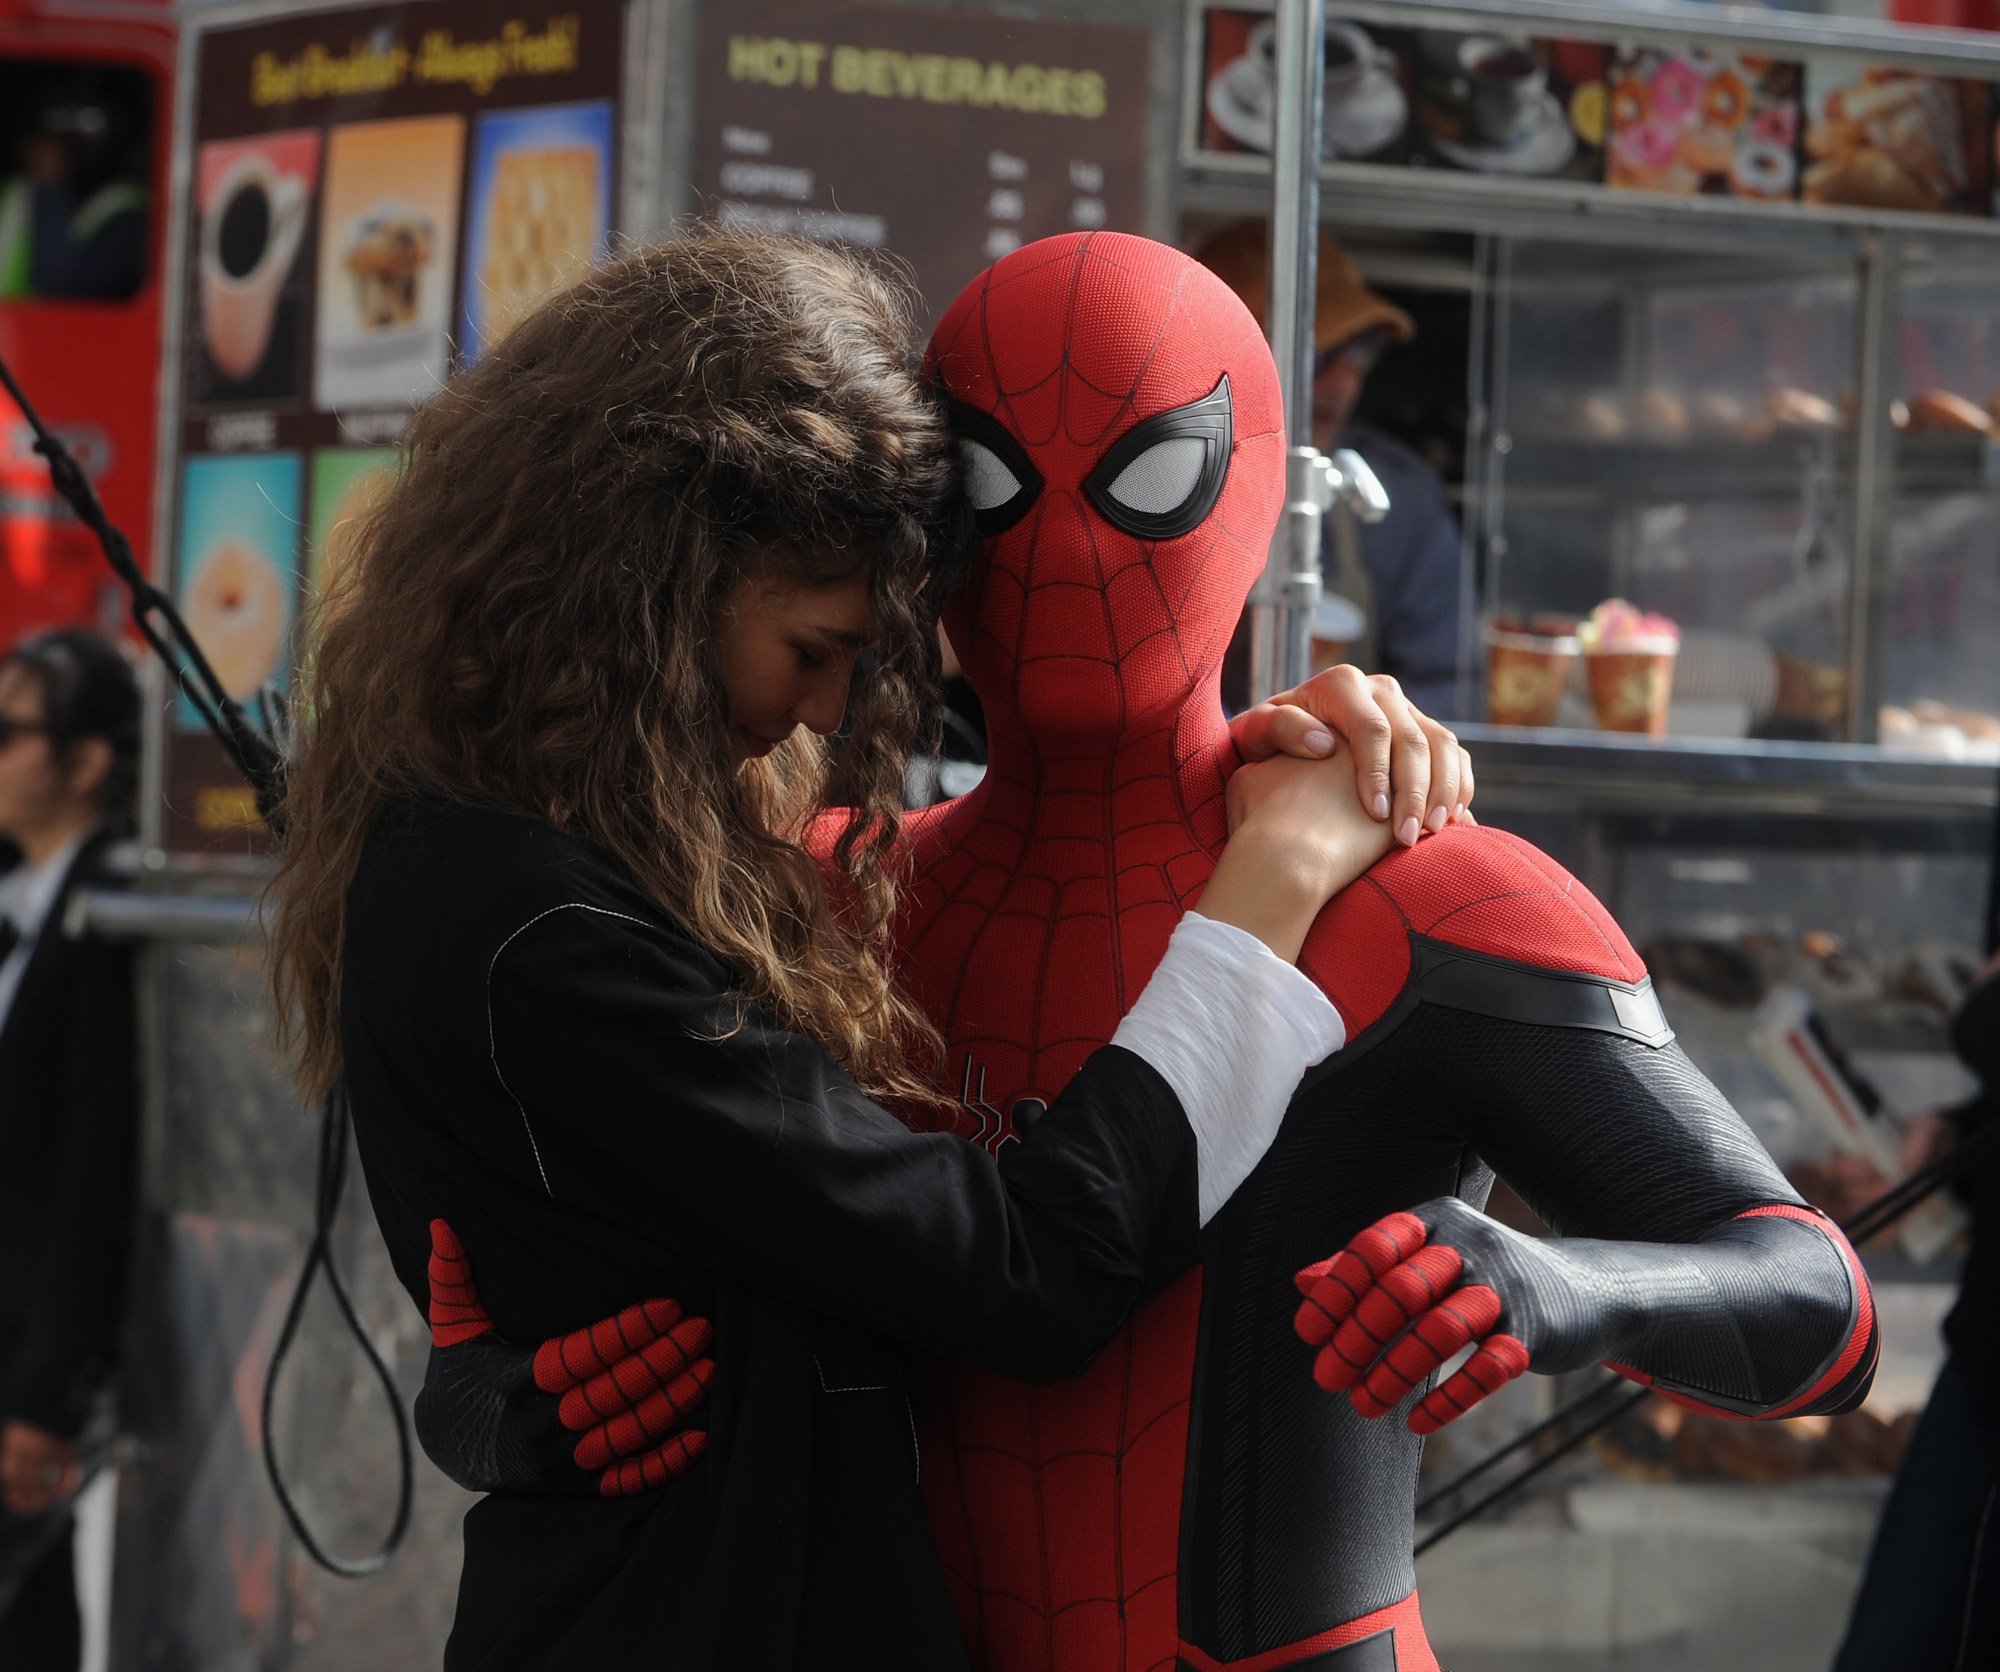 Tom Holland dressed as Spider-Man holding Zendaya as MJ. He's wearing the Spider-Man suit and she's wearing a black shirt and leaning her head against his.